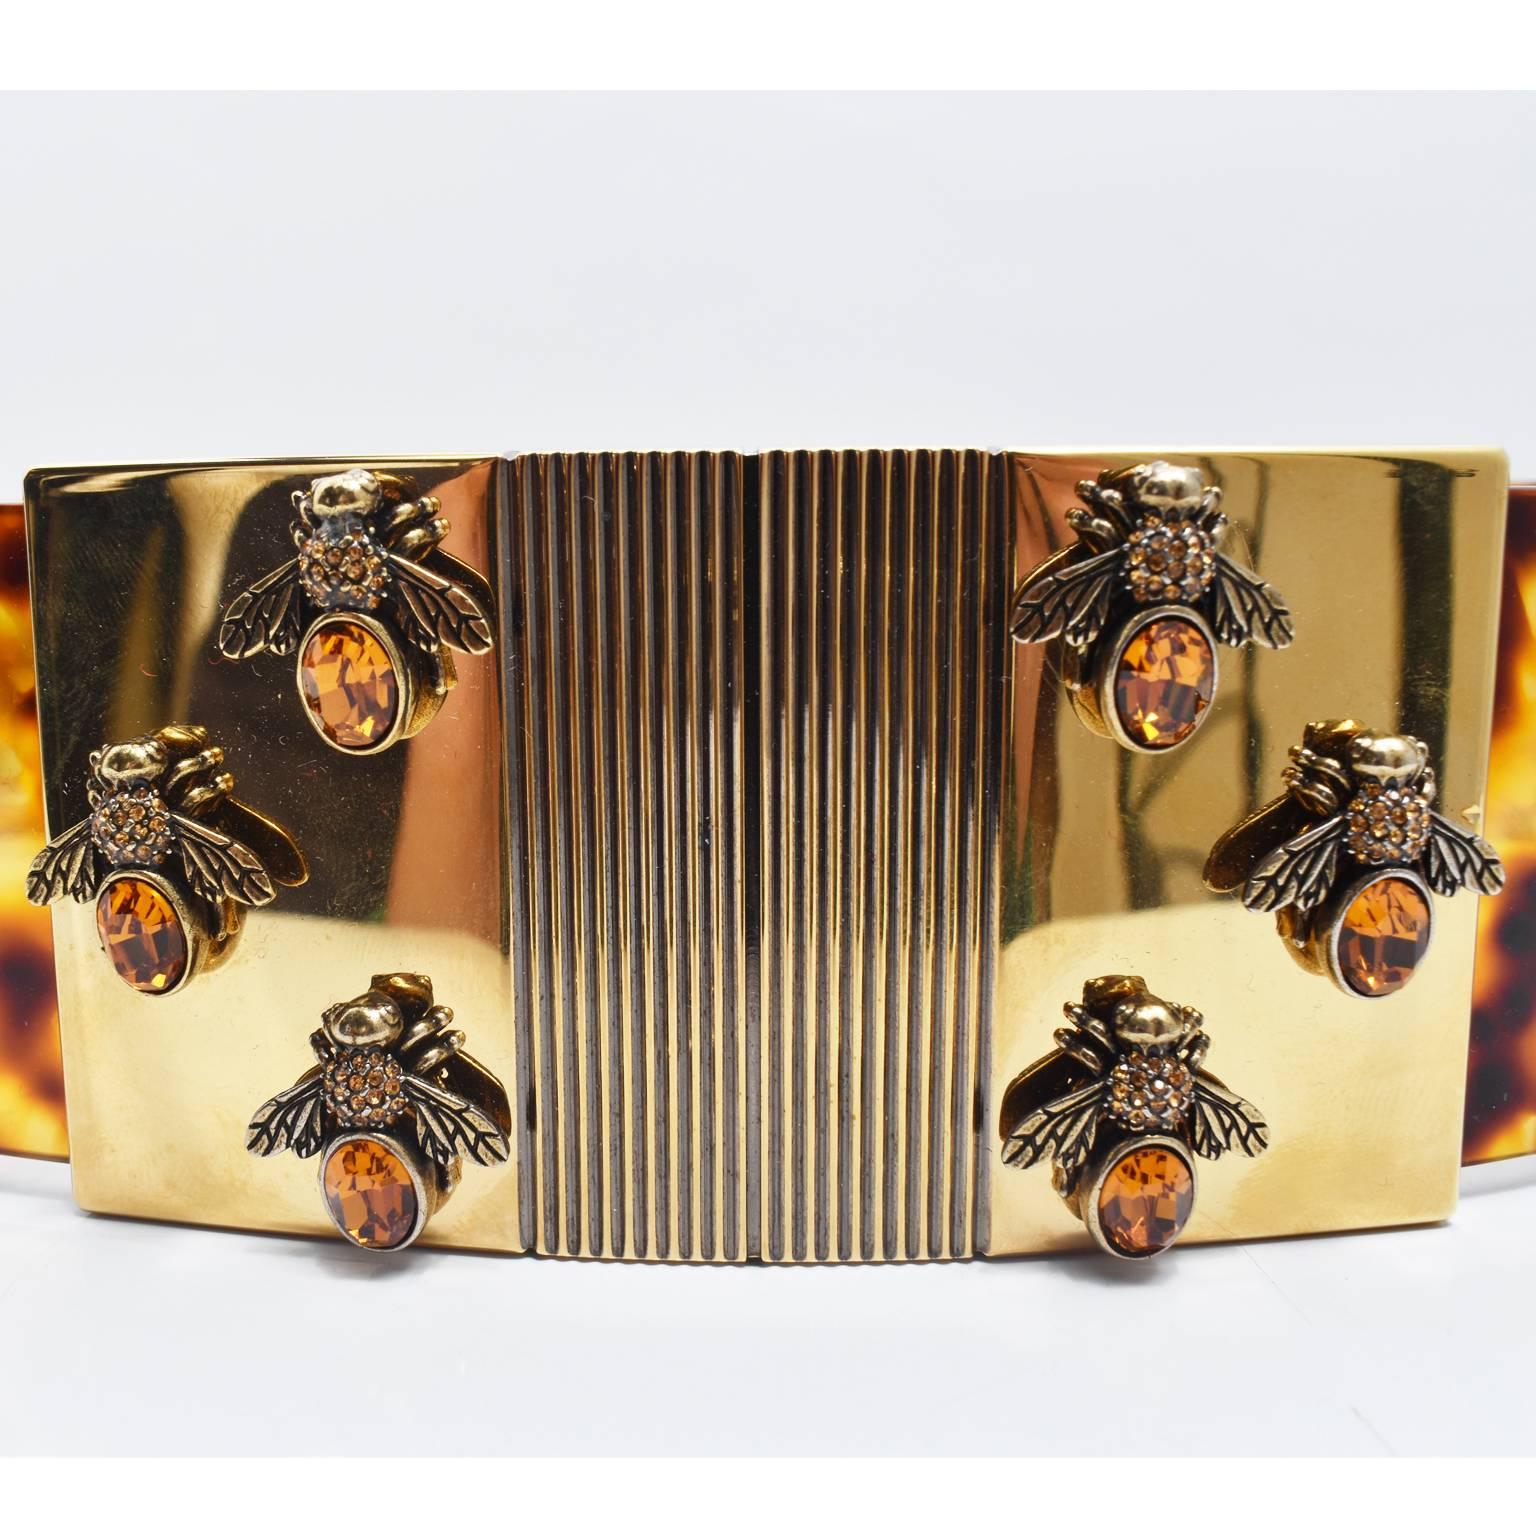 A stunning and extremely rare perspex belt from Alexander McQueen’s Spring/Summer 2013 runway collection. The waist belt is made from a circular piece of tortoiseshell perspex with a gold plated clasp at the front decorated with golden bees and